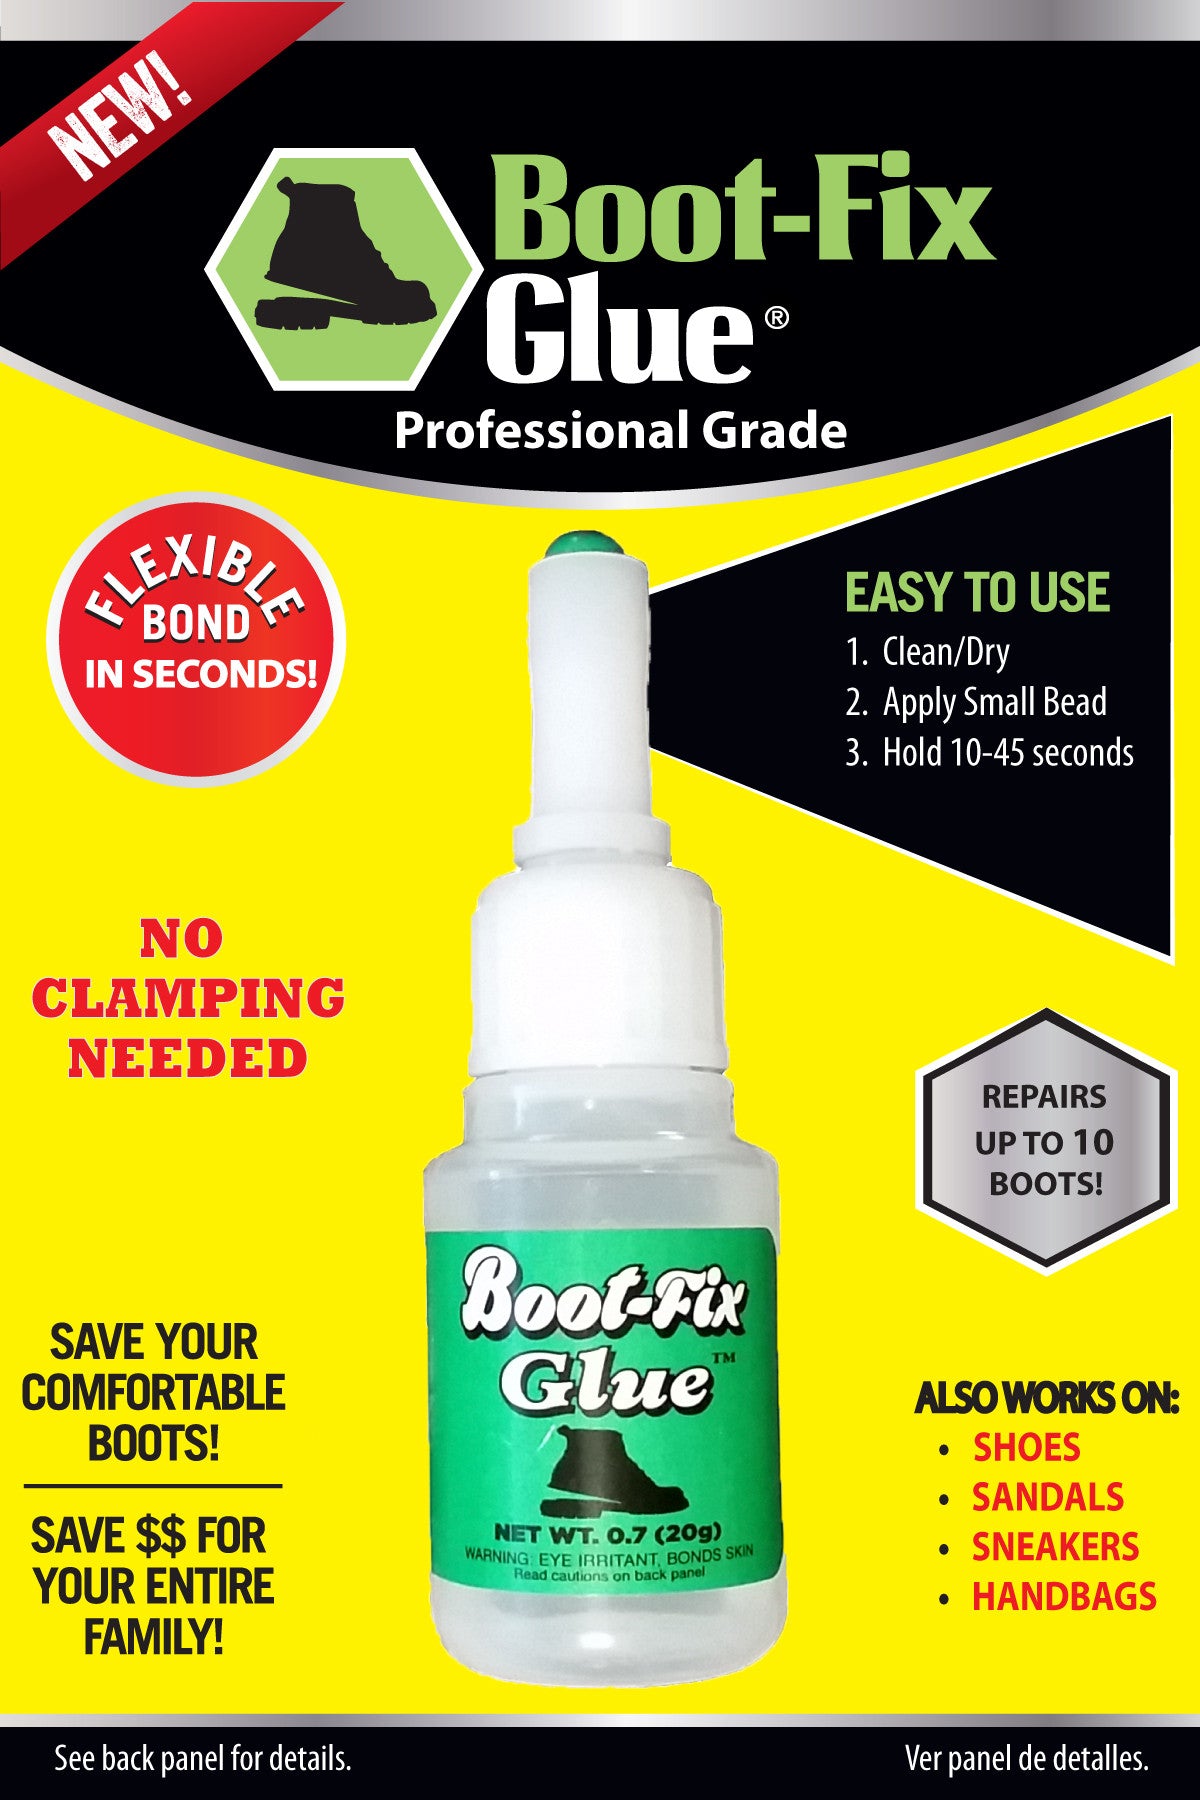 Here is how to find the best shoe glue for repairs